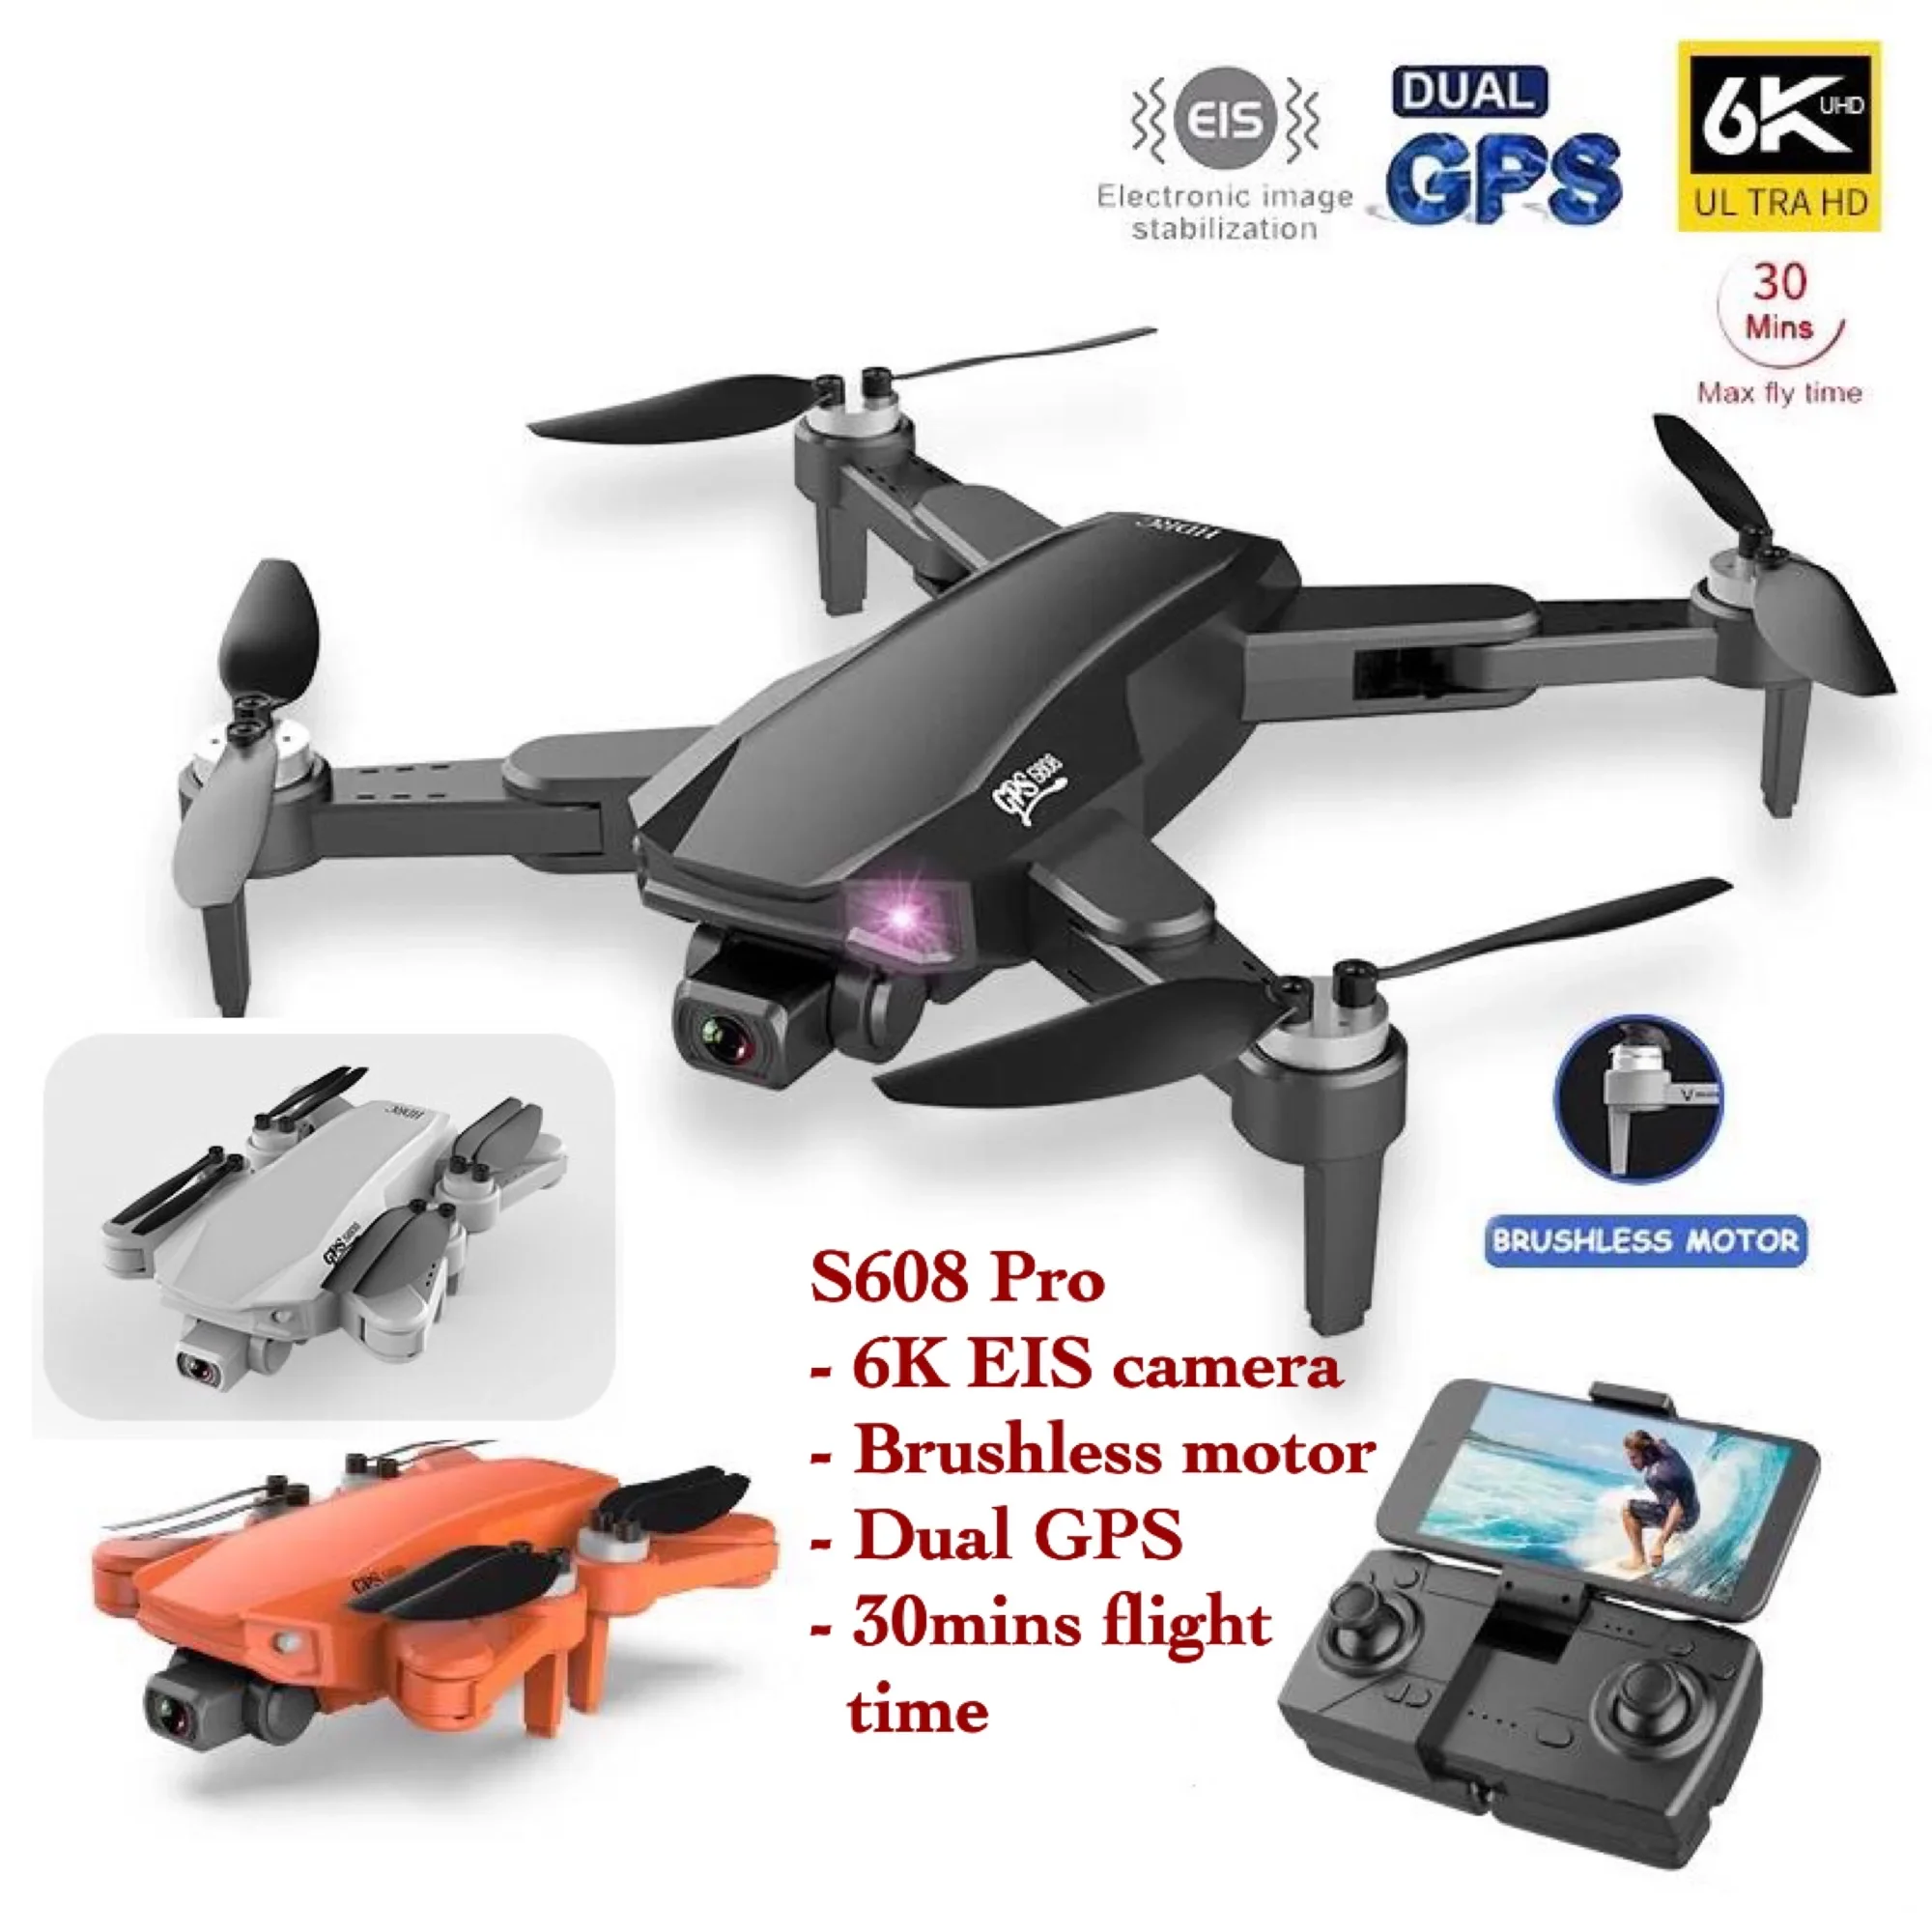 S608 Pro GPS Drone 6K Dual HD EIS Camera 30mins flight time Dual GPS Professional Aerial Photography Brushless Motor Foldable Quadcopter Drone